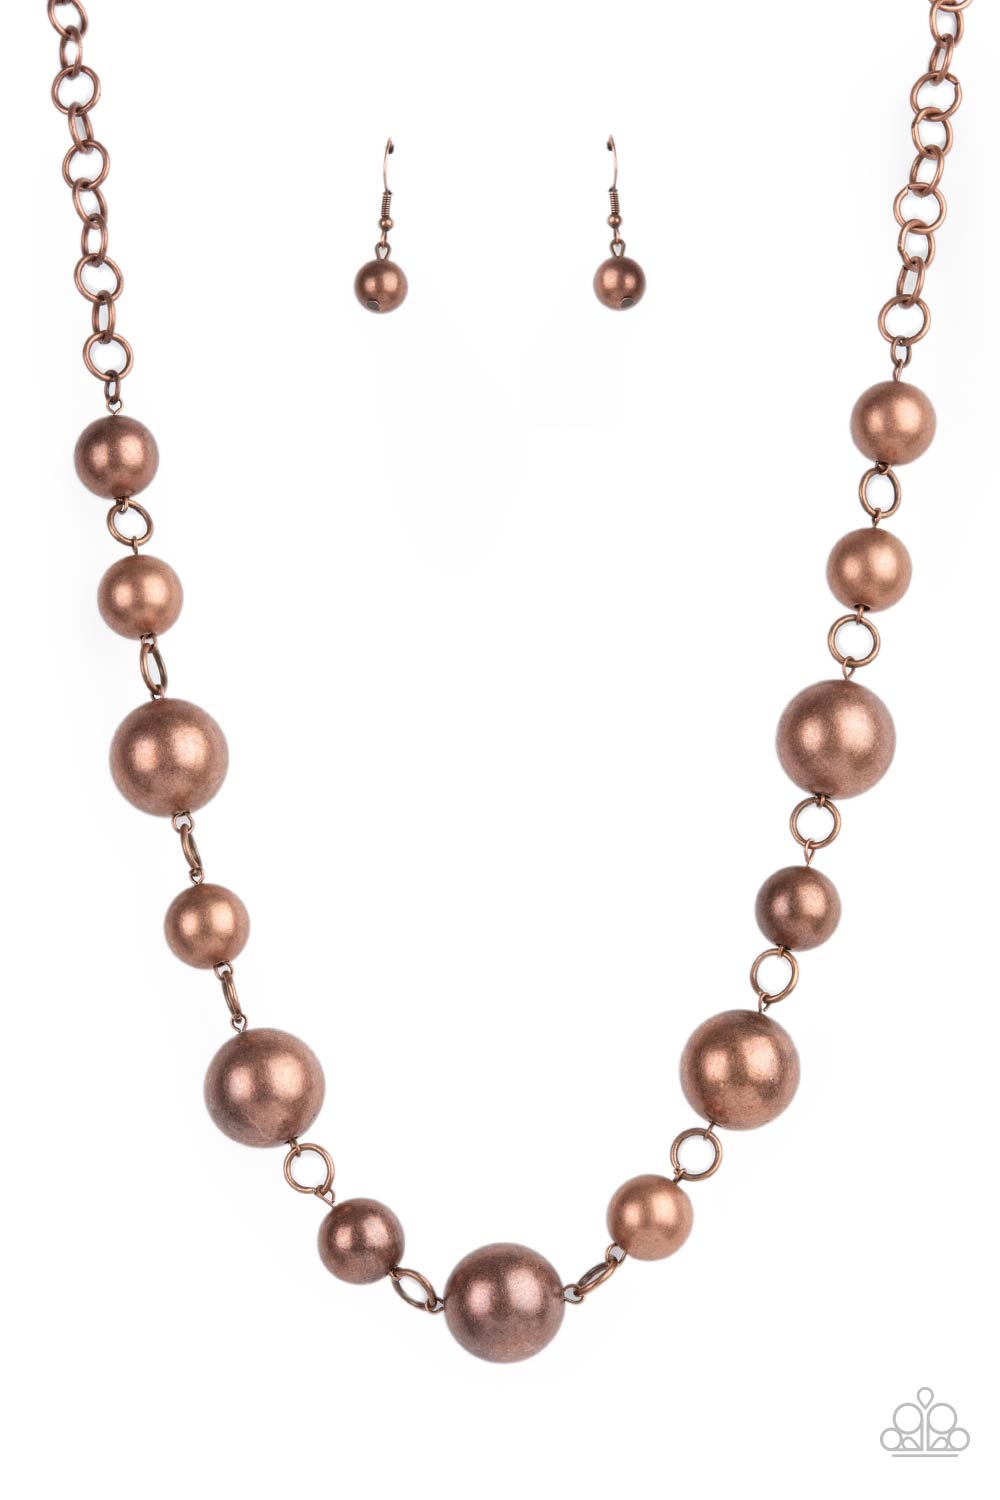 Commanding Composure Copper Necklace - Paparazzi Accessories  An oversized collection of intense copper beads boldly link below the collar, creating a dramatic industrial display. Features an adjustable clasp closure.  All Paparazzi Accessories are lead free and nickel free!  Sold as one individual necklace. Includes one pair of matching earrings.